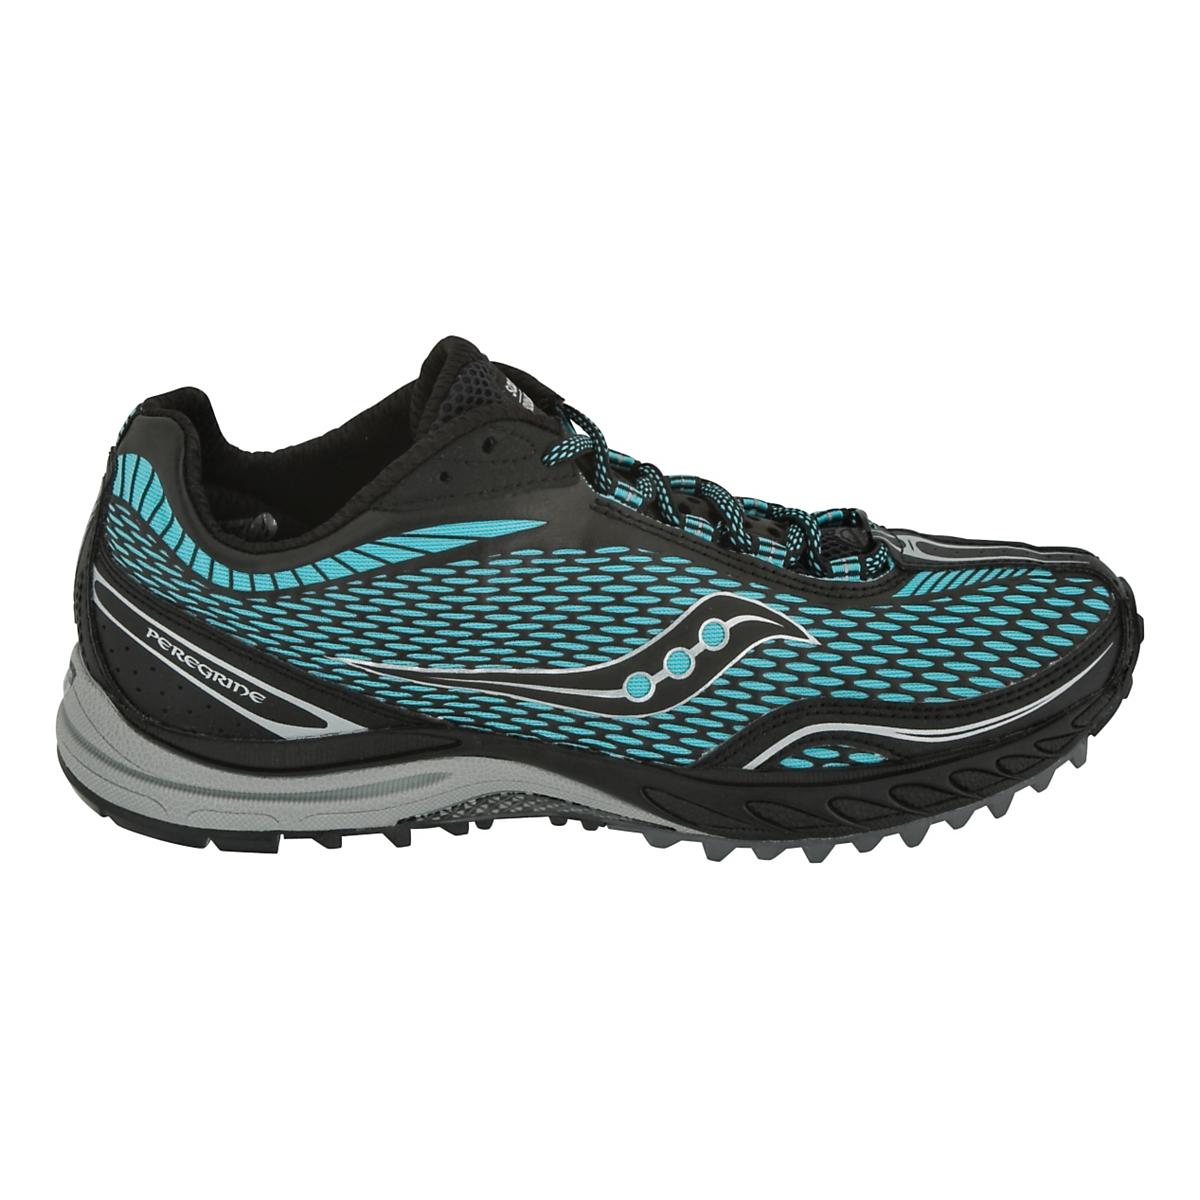 Womens Saucony ProGrid Peregrine Trail Running Shoe at Road Runner Sports